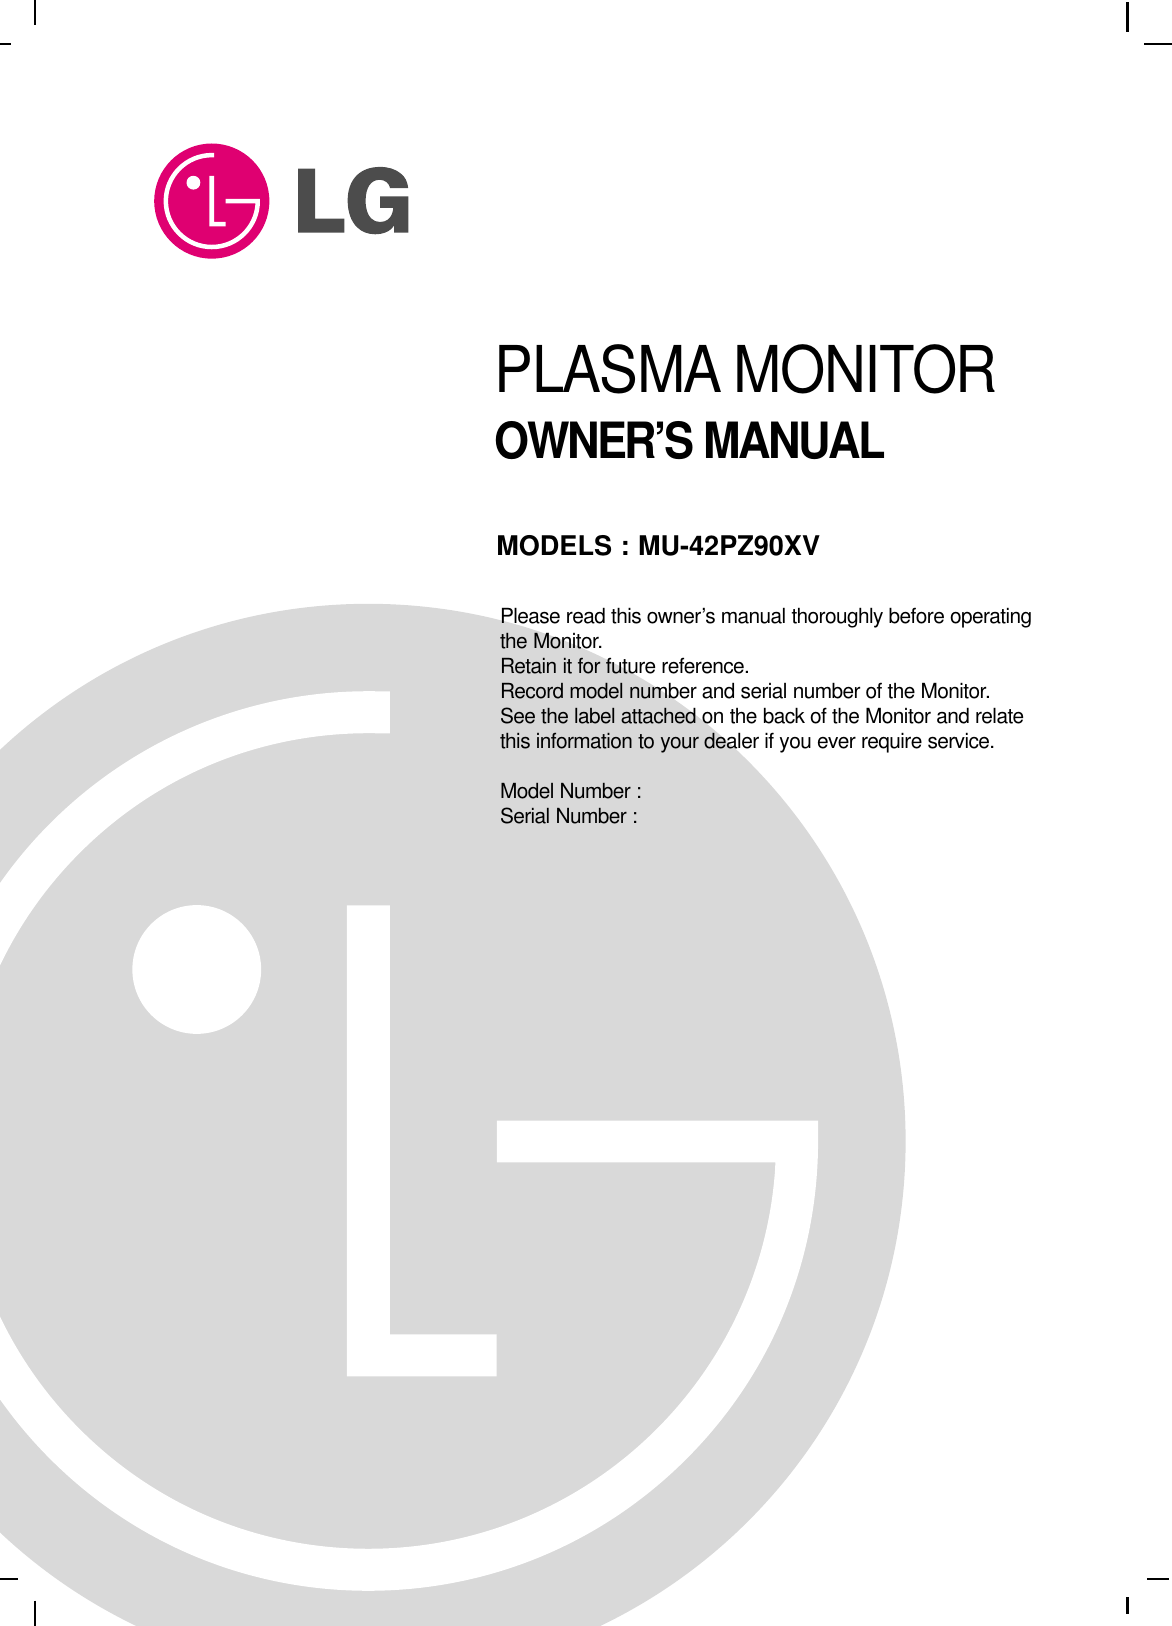 PLASMA MONITOROWNER’S MANUALPlease read this owner’s manual thoroughly before operatingthe Monitor.Retain it for future reference.Record model number and serial number of the Monitor.See the label attached on the back of the Monitor and relatethis information to your dealer if you ever require service.Model Number : Serial Number : MODELS : MU-42PZ90XV